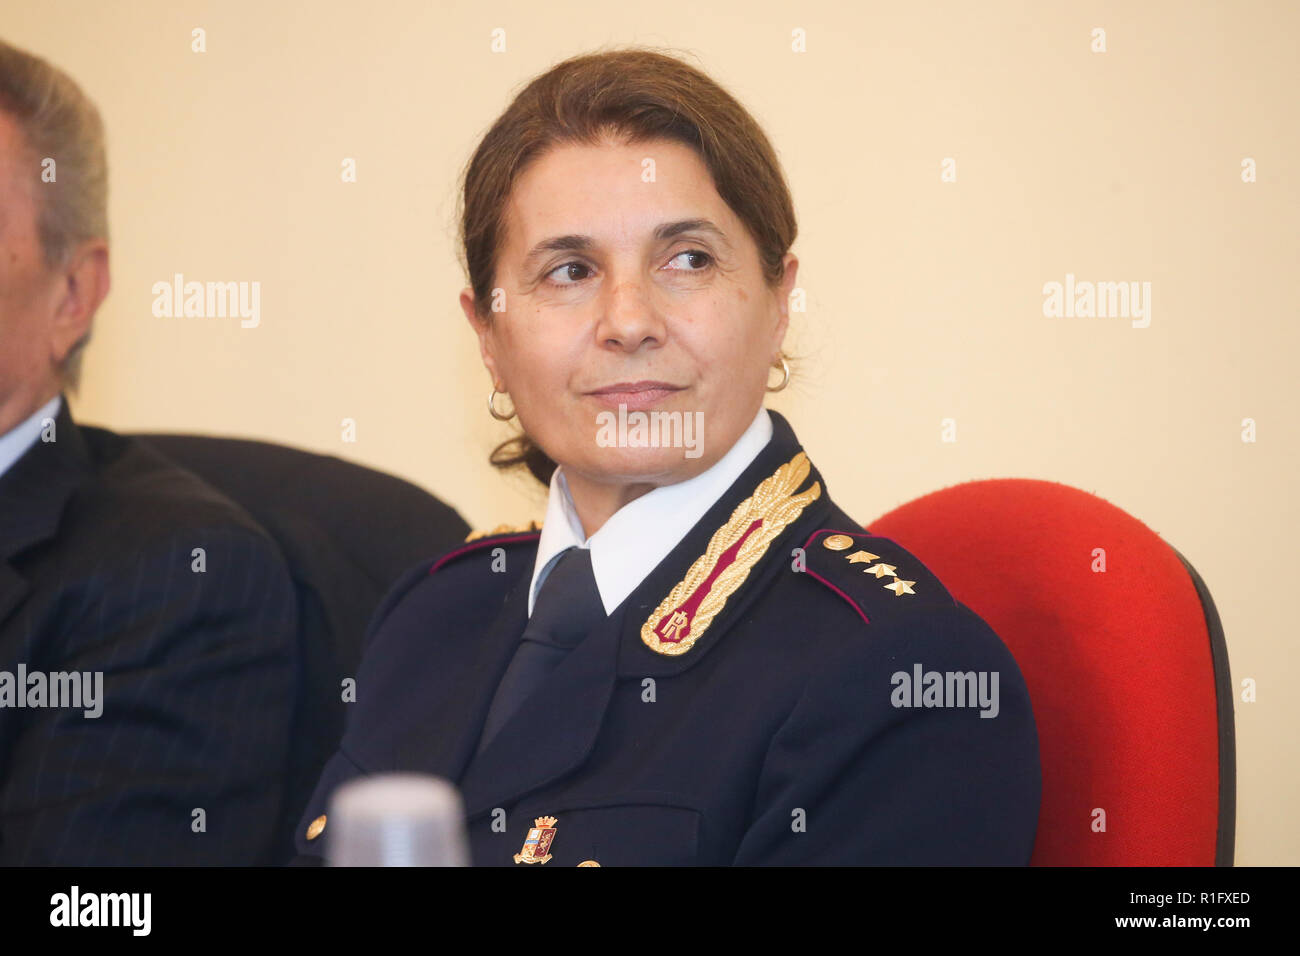 Caserta, Campania, Italy, 12th Nov 2018. School V ¡ educational circle of Caserta first in Italy to include asylum seekers in its staff in photo the Deputy Commissioner of the Police of the State Police of Caserta, Maria Rosaria Mauro Credit: Antonio Balasco/Alamy Live News Stock Photo